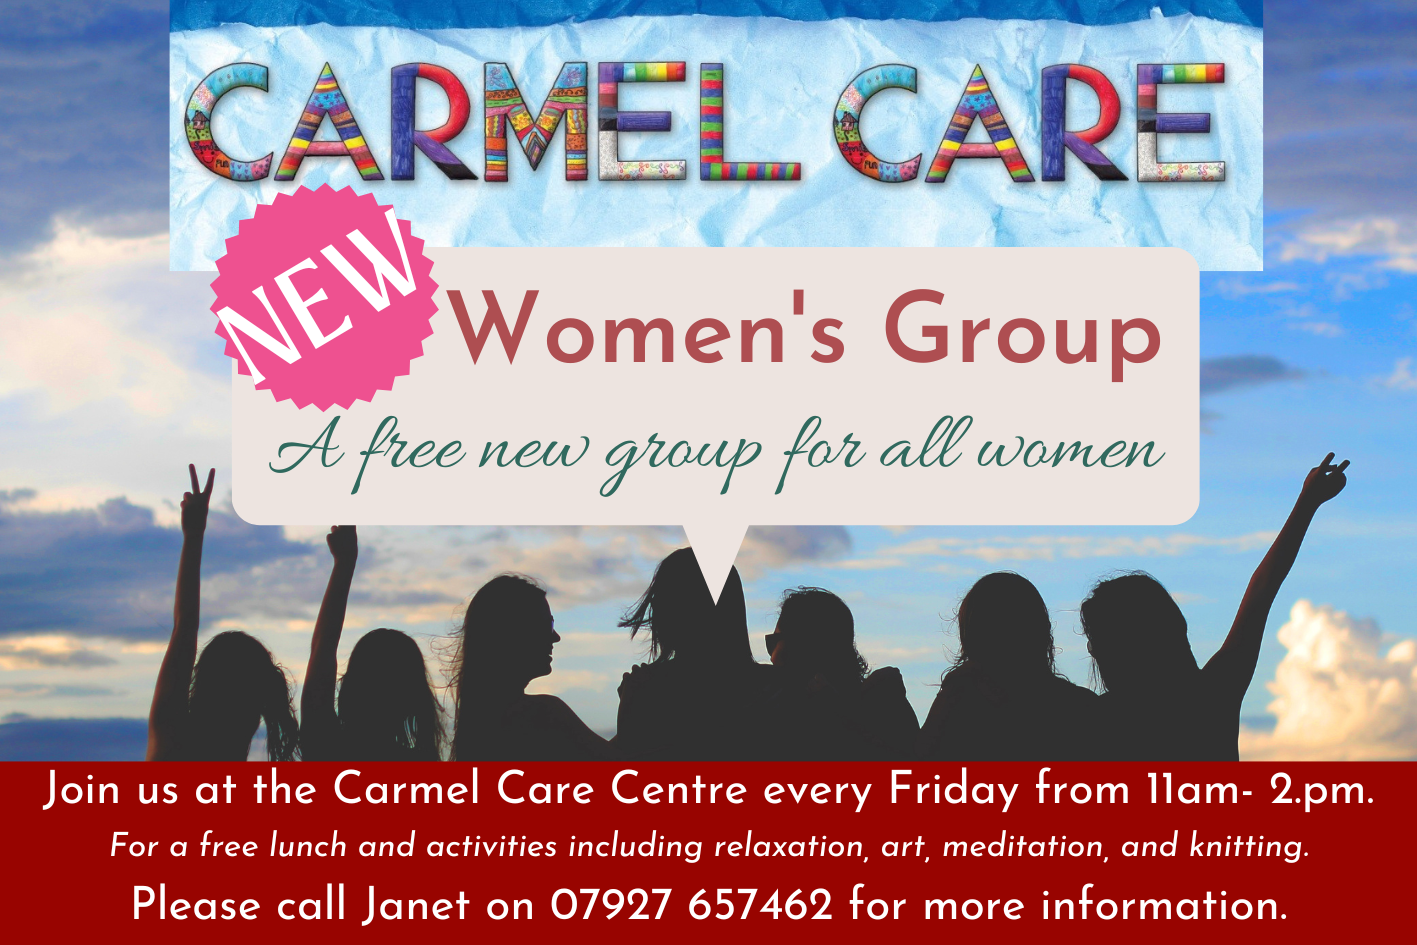 Carmel Care Woman’s Group A free group for all women. Please join us at the Carmel Care Centre every Friday from 11am- 2pm starting 27th January for lunch and activities including relaxation, art, meditation, knitting, sewing and crochet. Carmel Care Centre,172 Dykes Hall Road, Sheffield S6 4GS Please call Janet on 07927 657462 for more information.